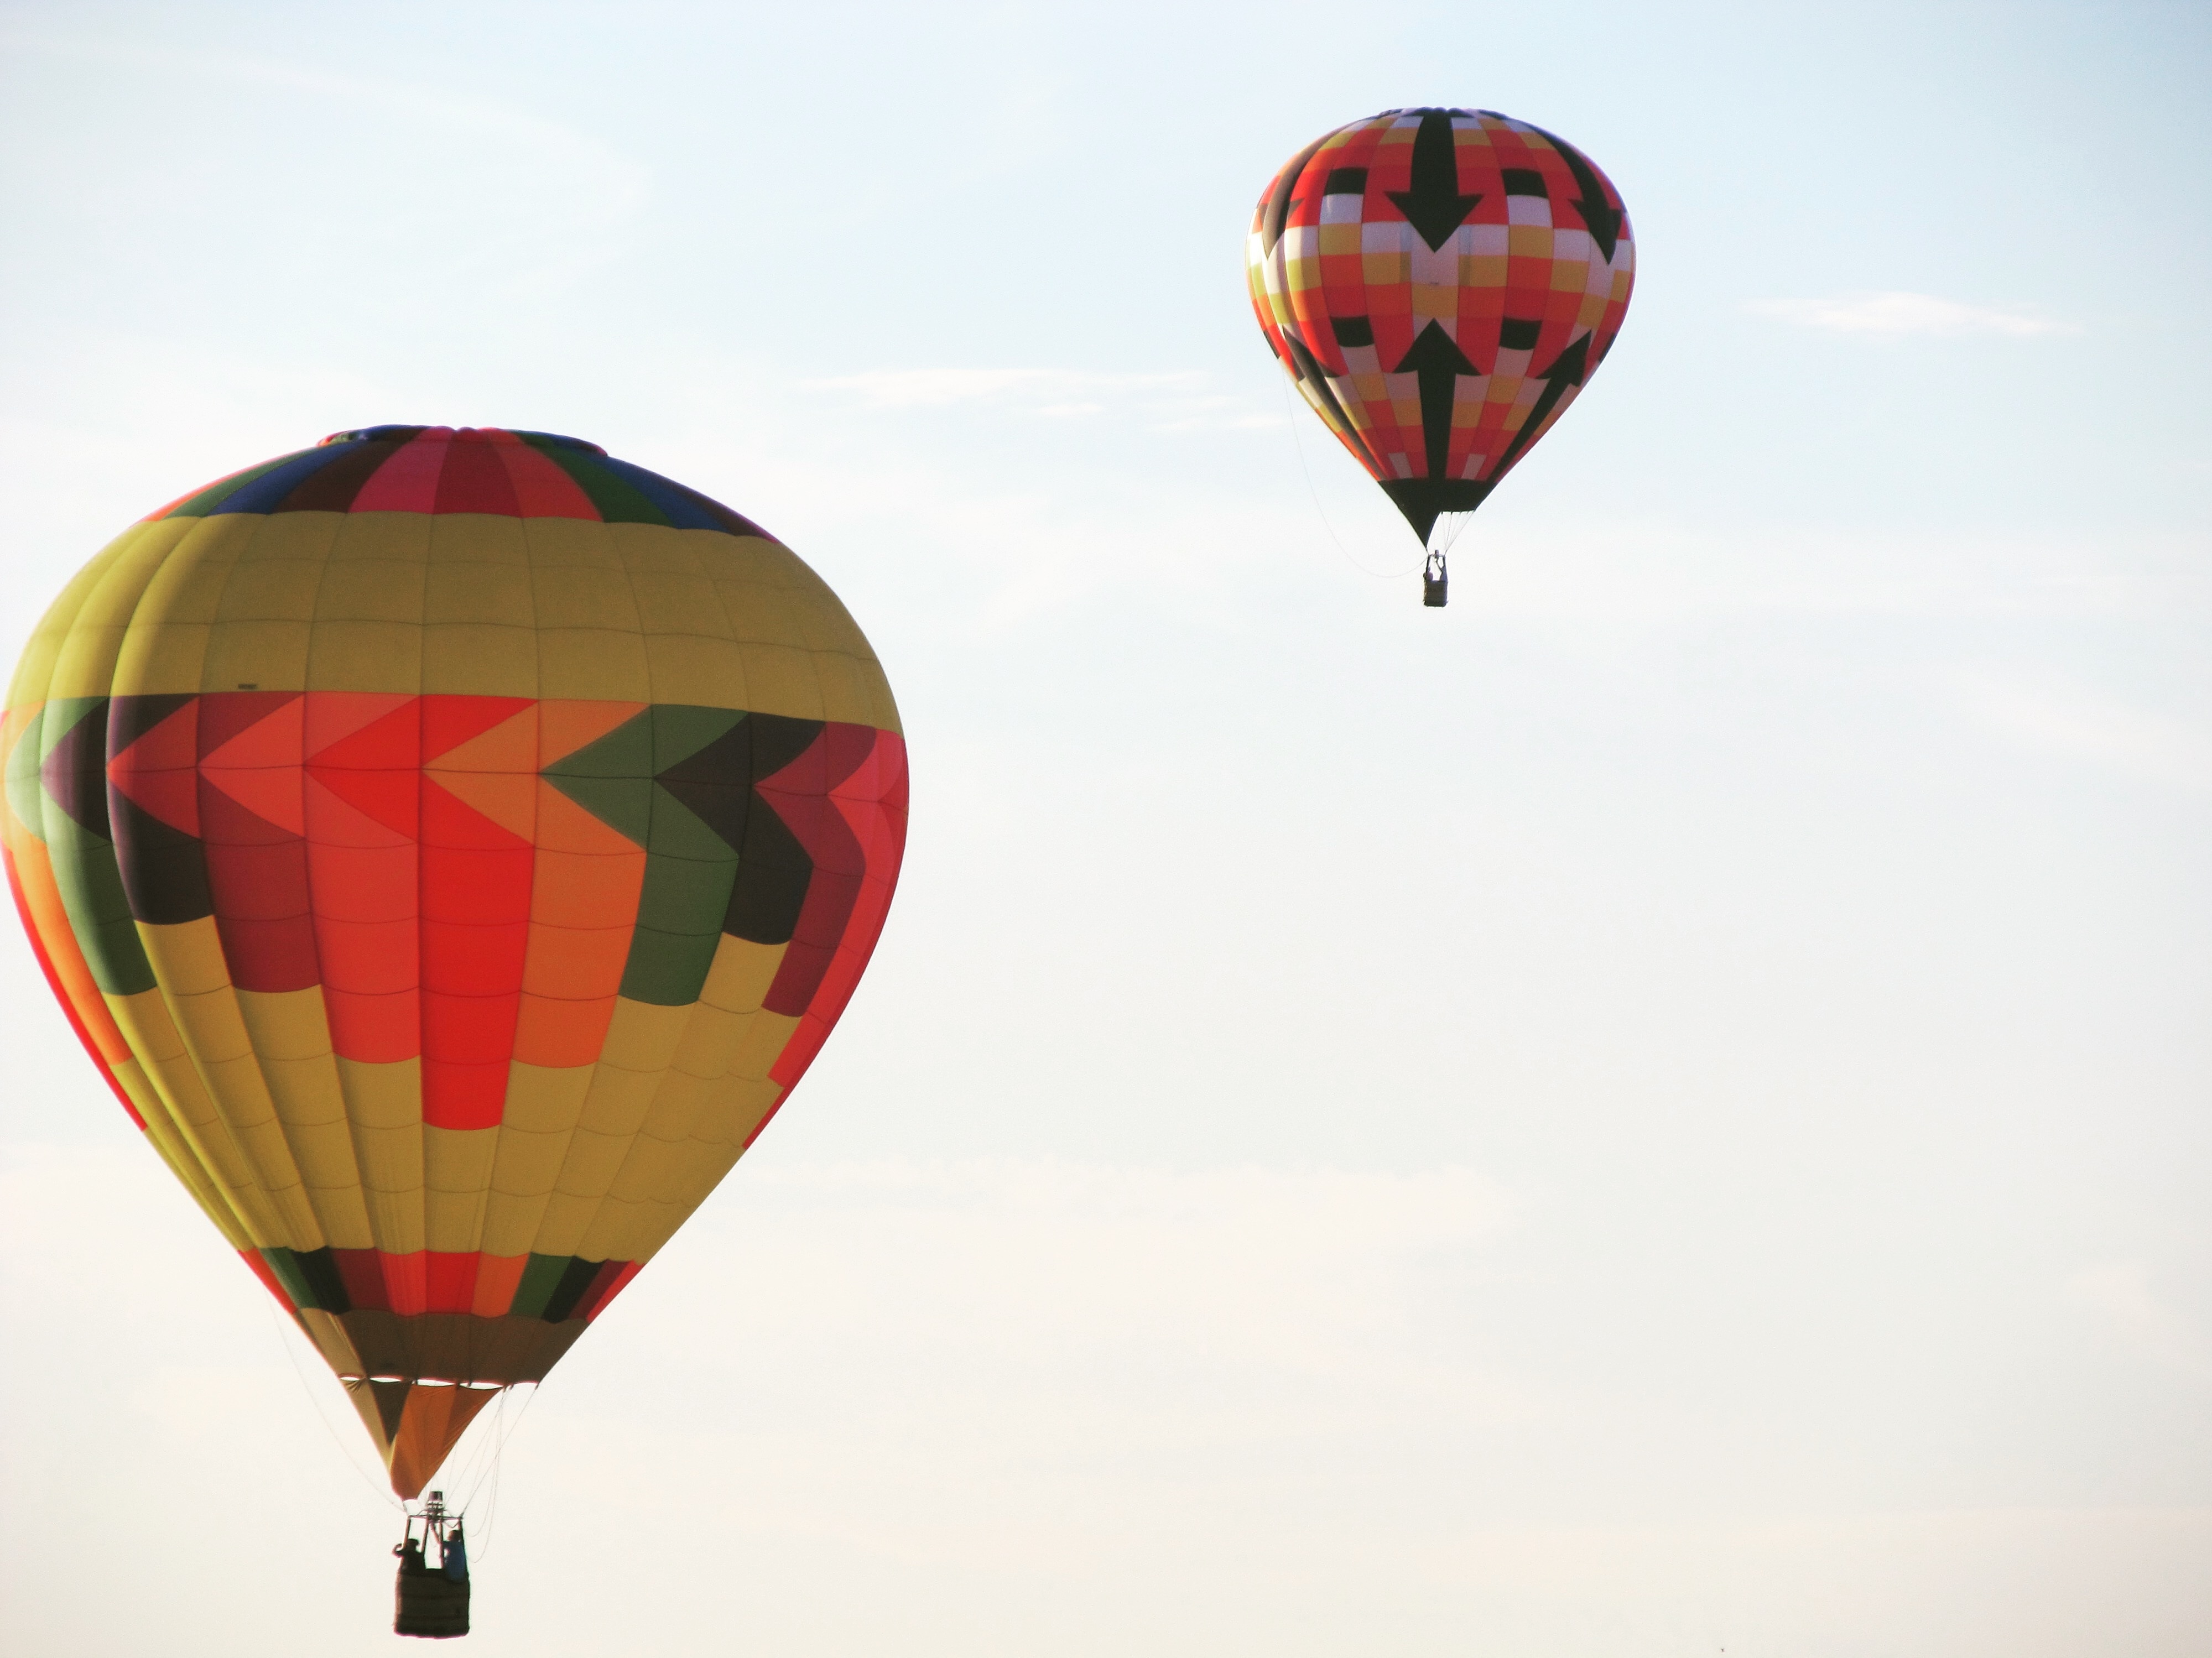 2 multicolored hot air balloons